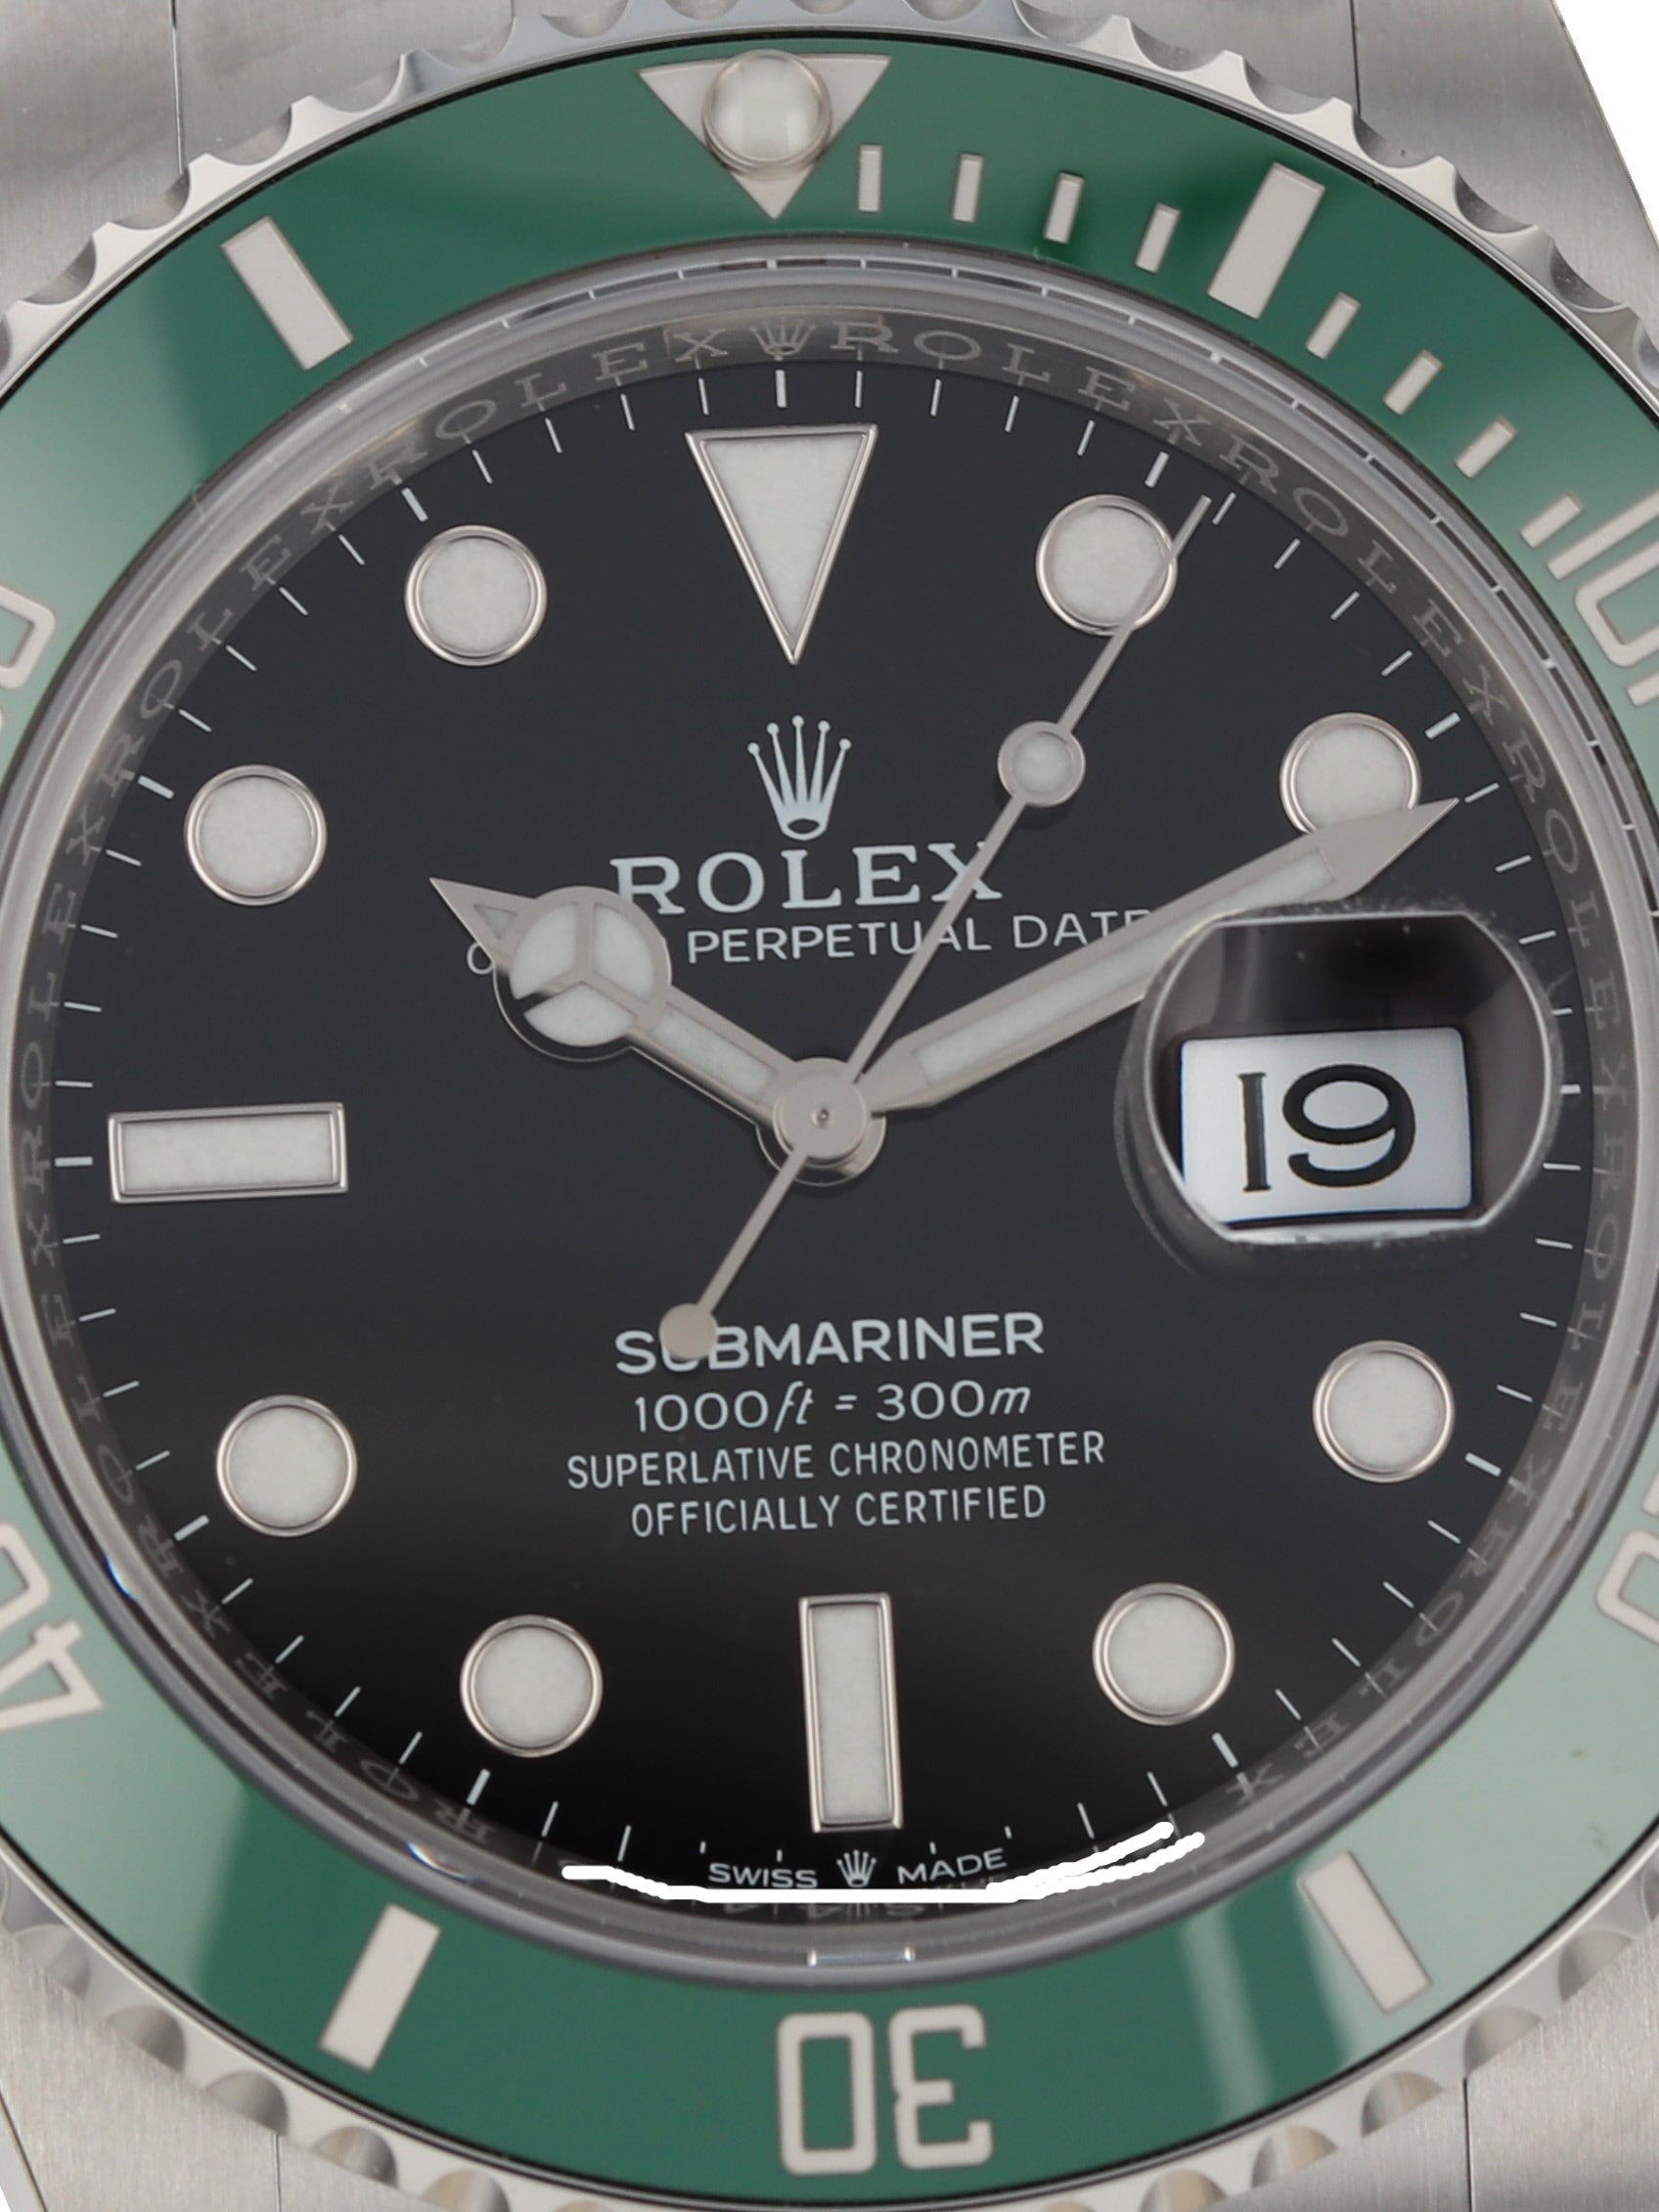 Rolex Steel Submariner Date Watch - The Starbucks - Green Bezel - Blac –  Rare Time NY